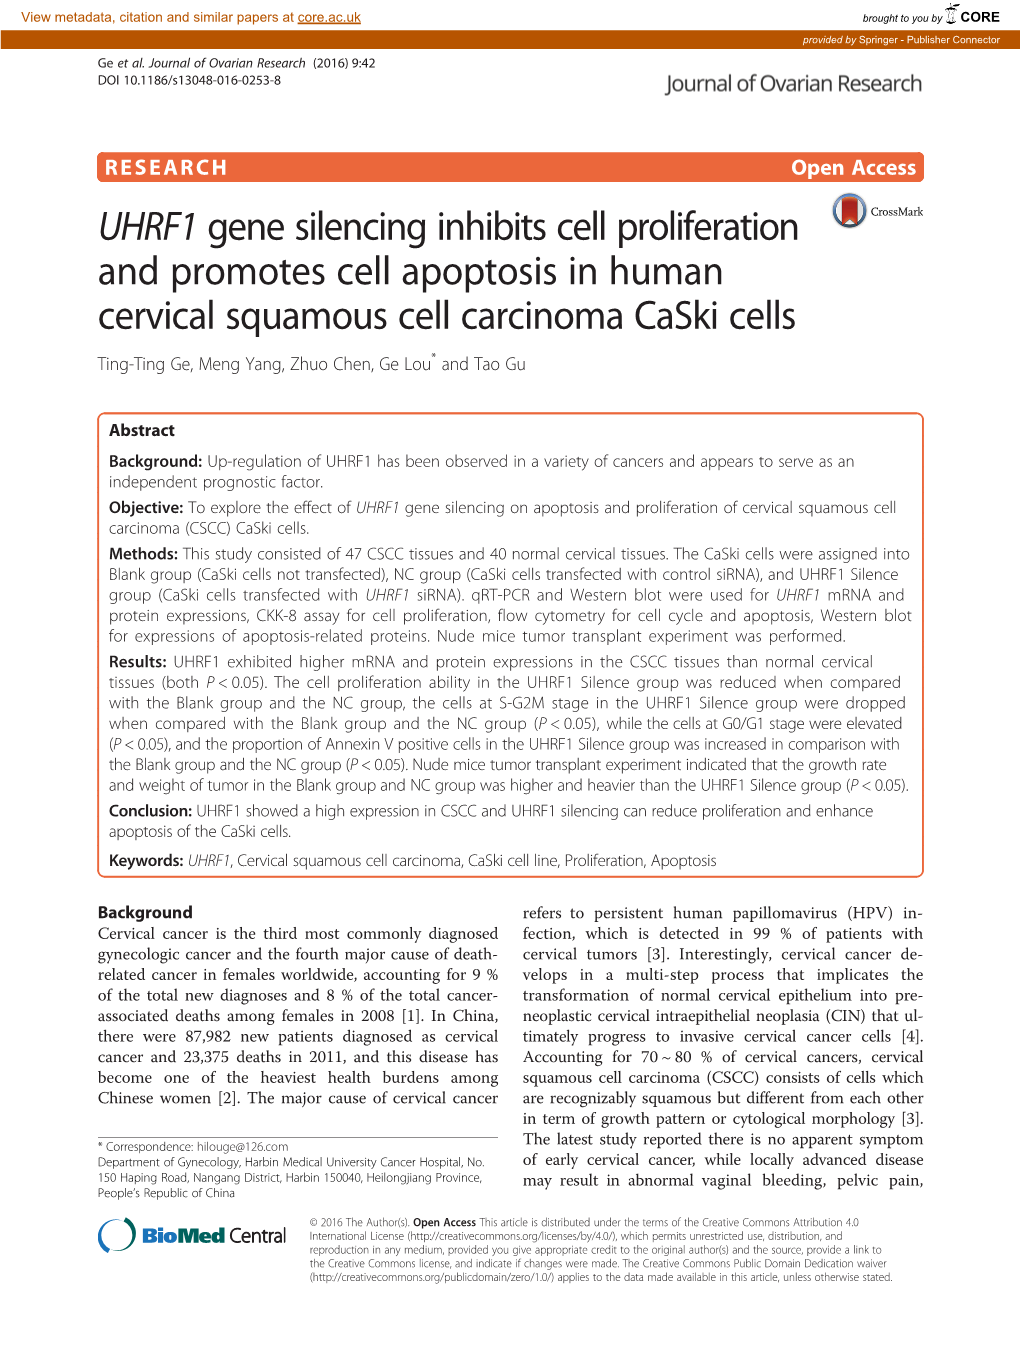 UHRF1 Gene Silencing Inhibits Cell Proliferation and Promotes Cell